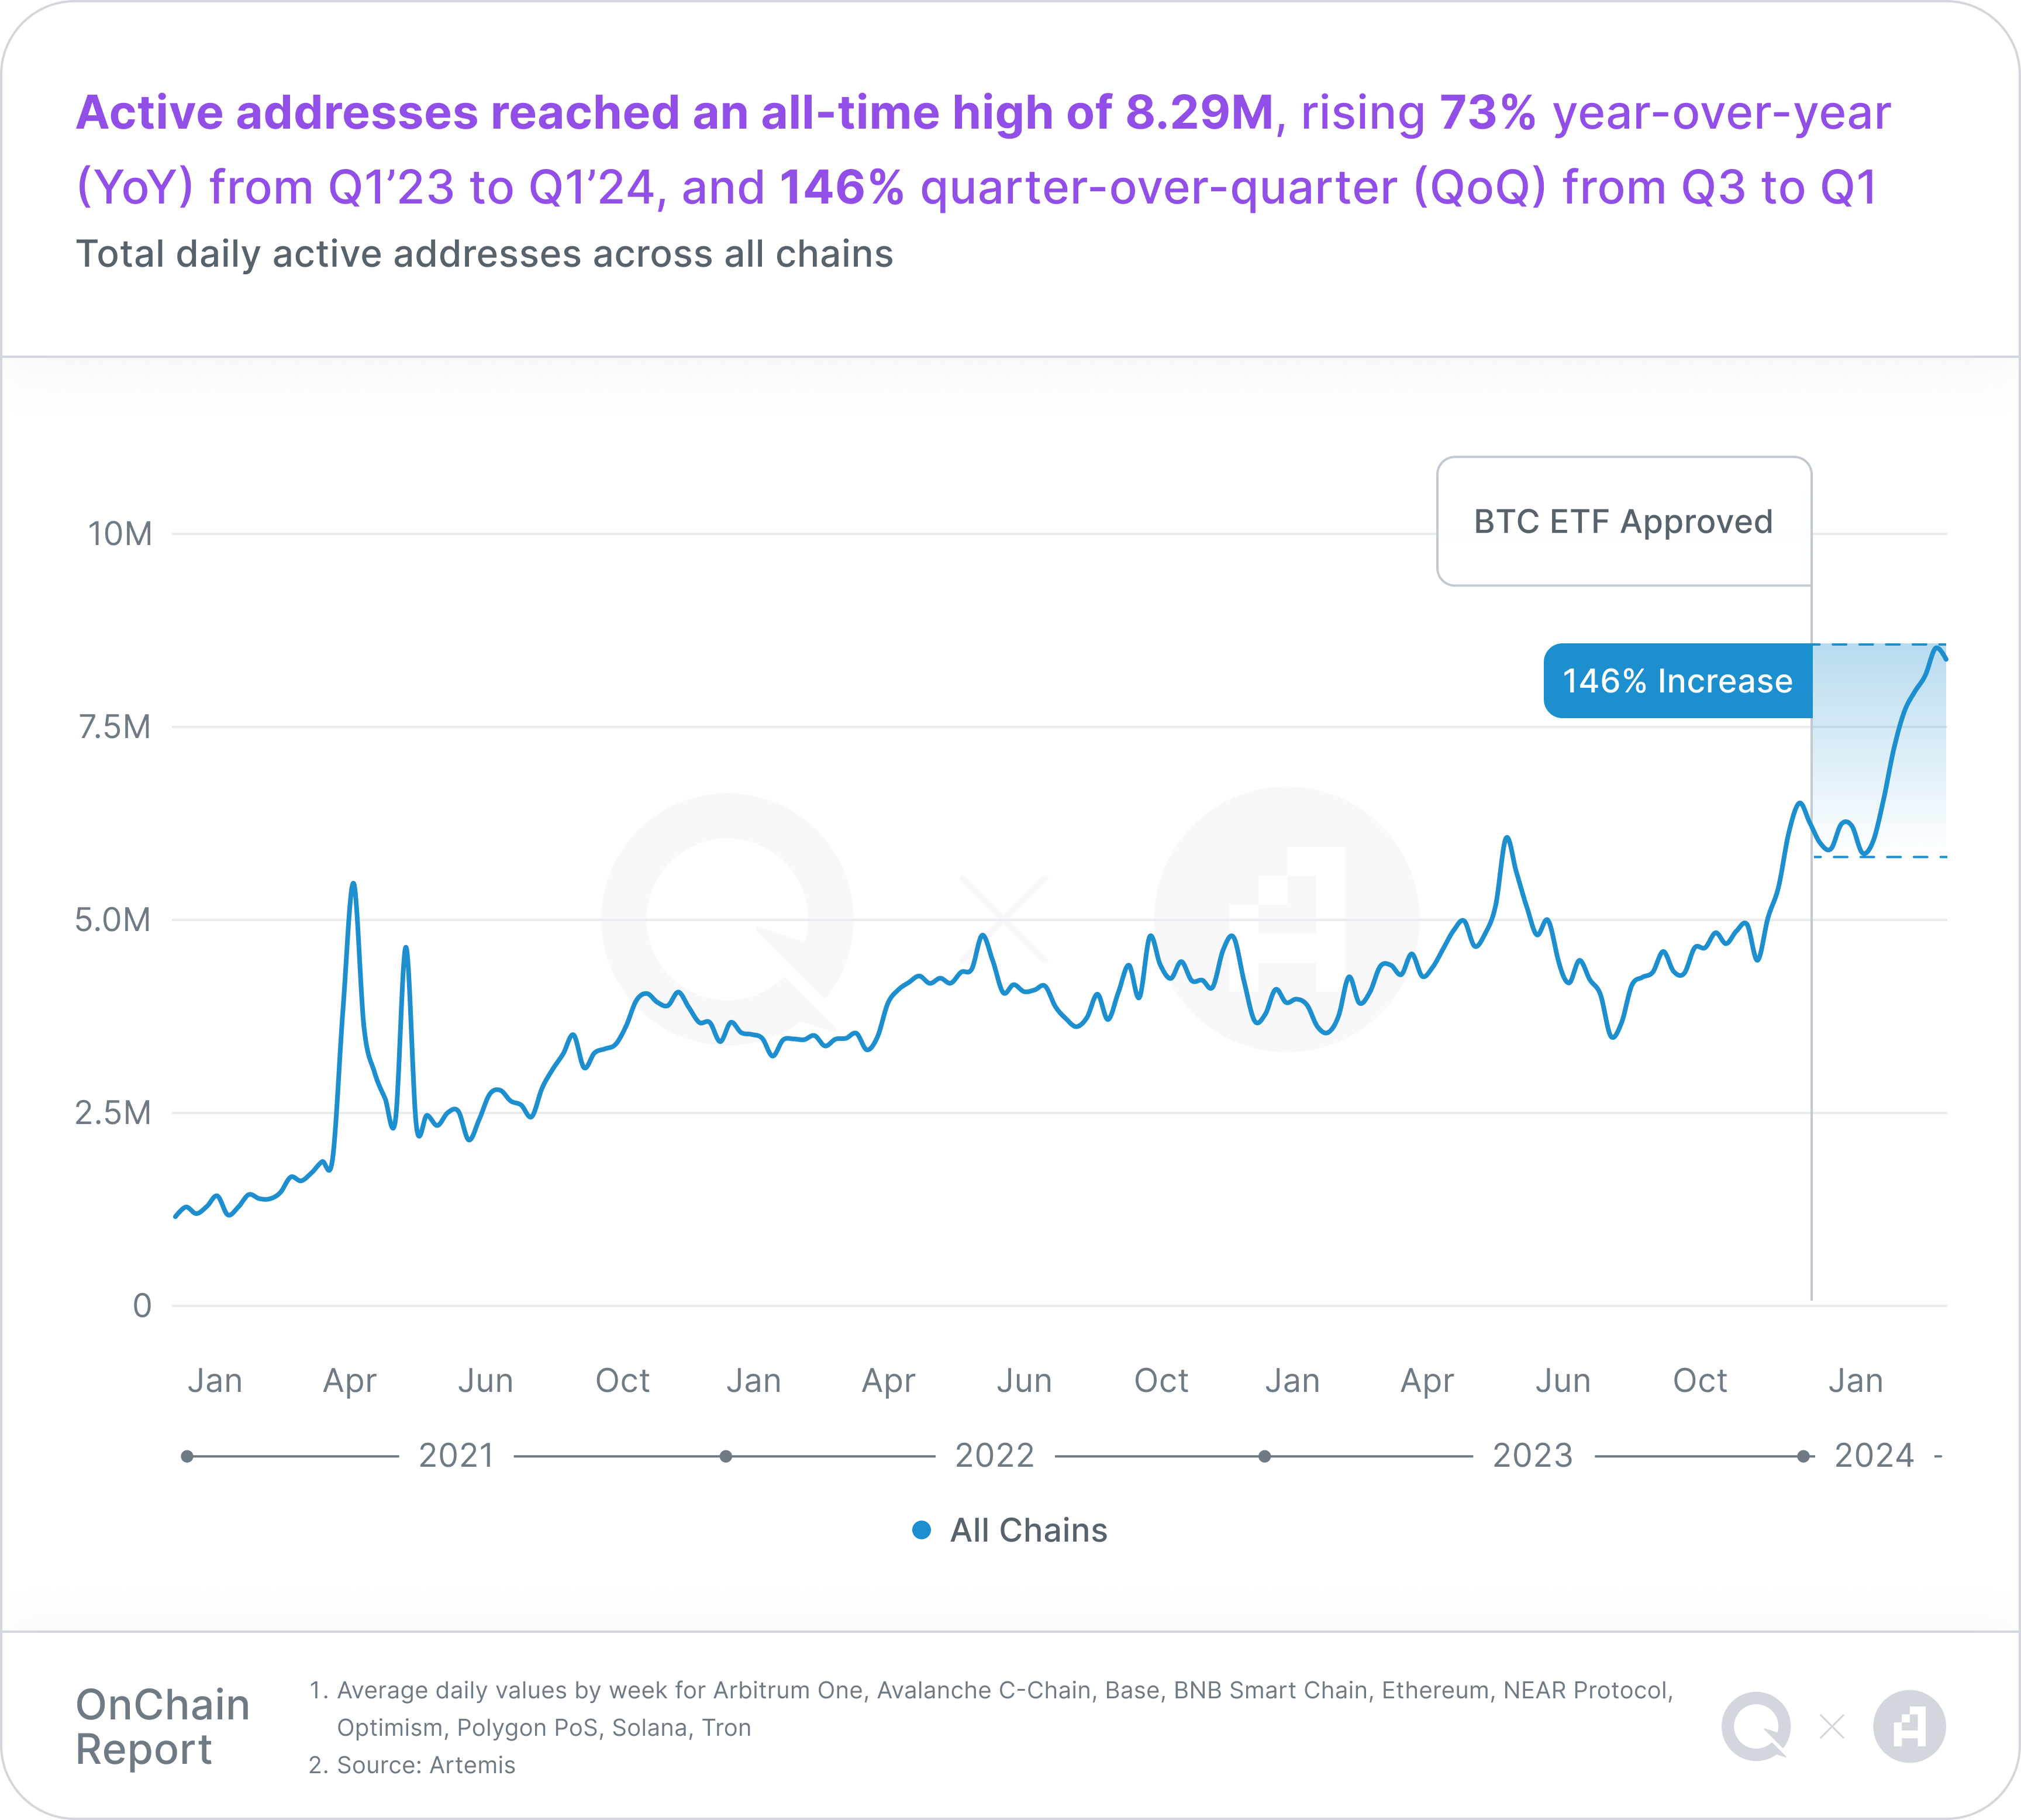 QuickNode and Artemis Release Q1 2024 OnChain Report: Bitcoin ETF Kickstarts Crypto Spring with 146% Increase From Q3 in Daily Active Addresses